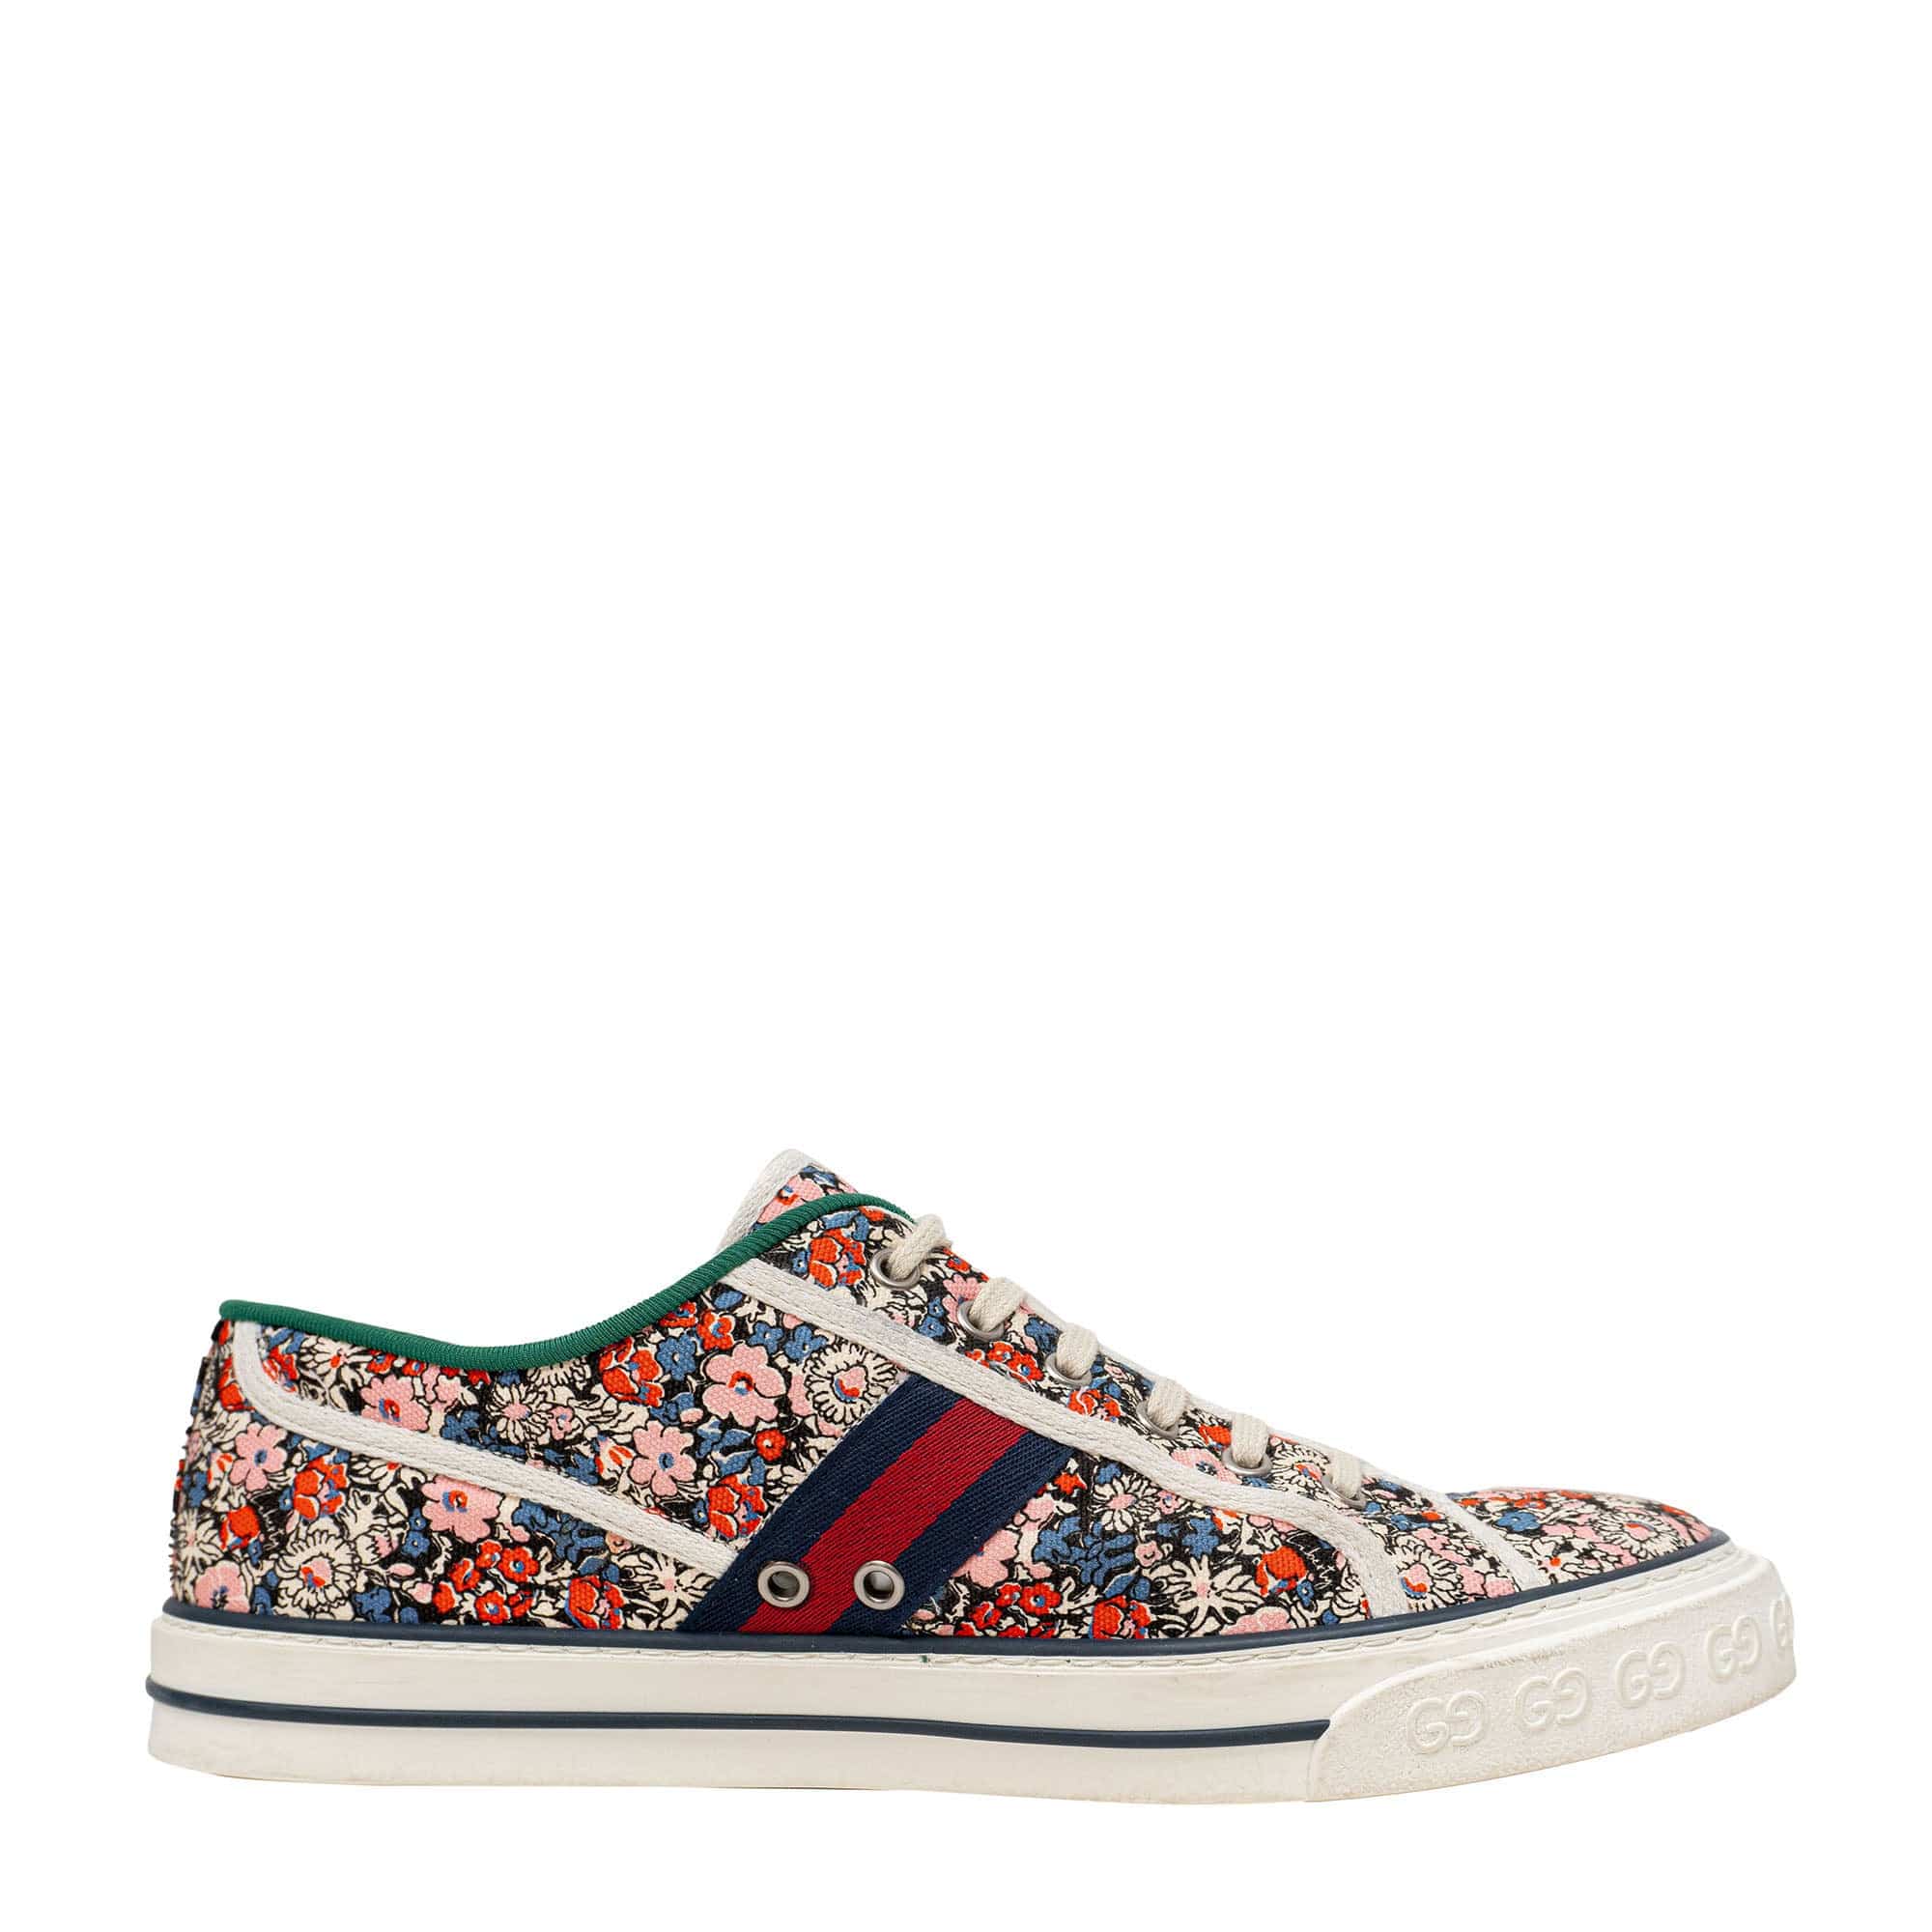 Gucci Gucci Tennis 1977 Floral Canvas Sneakers 10 SYCH059